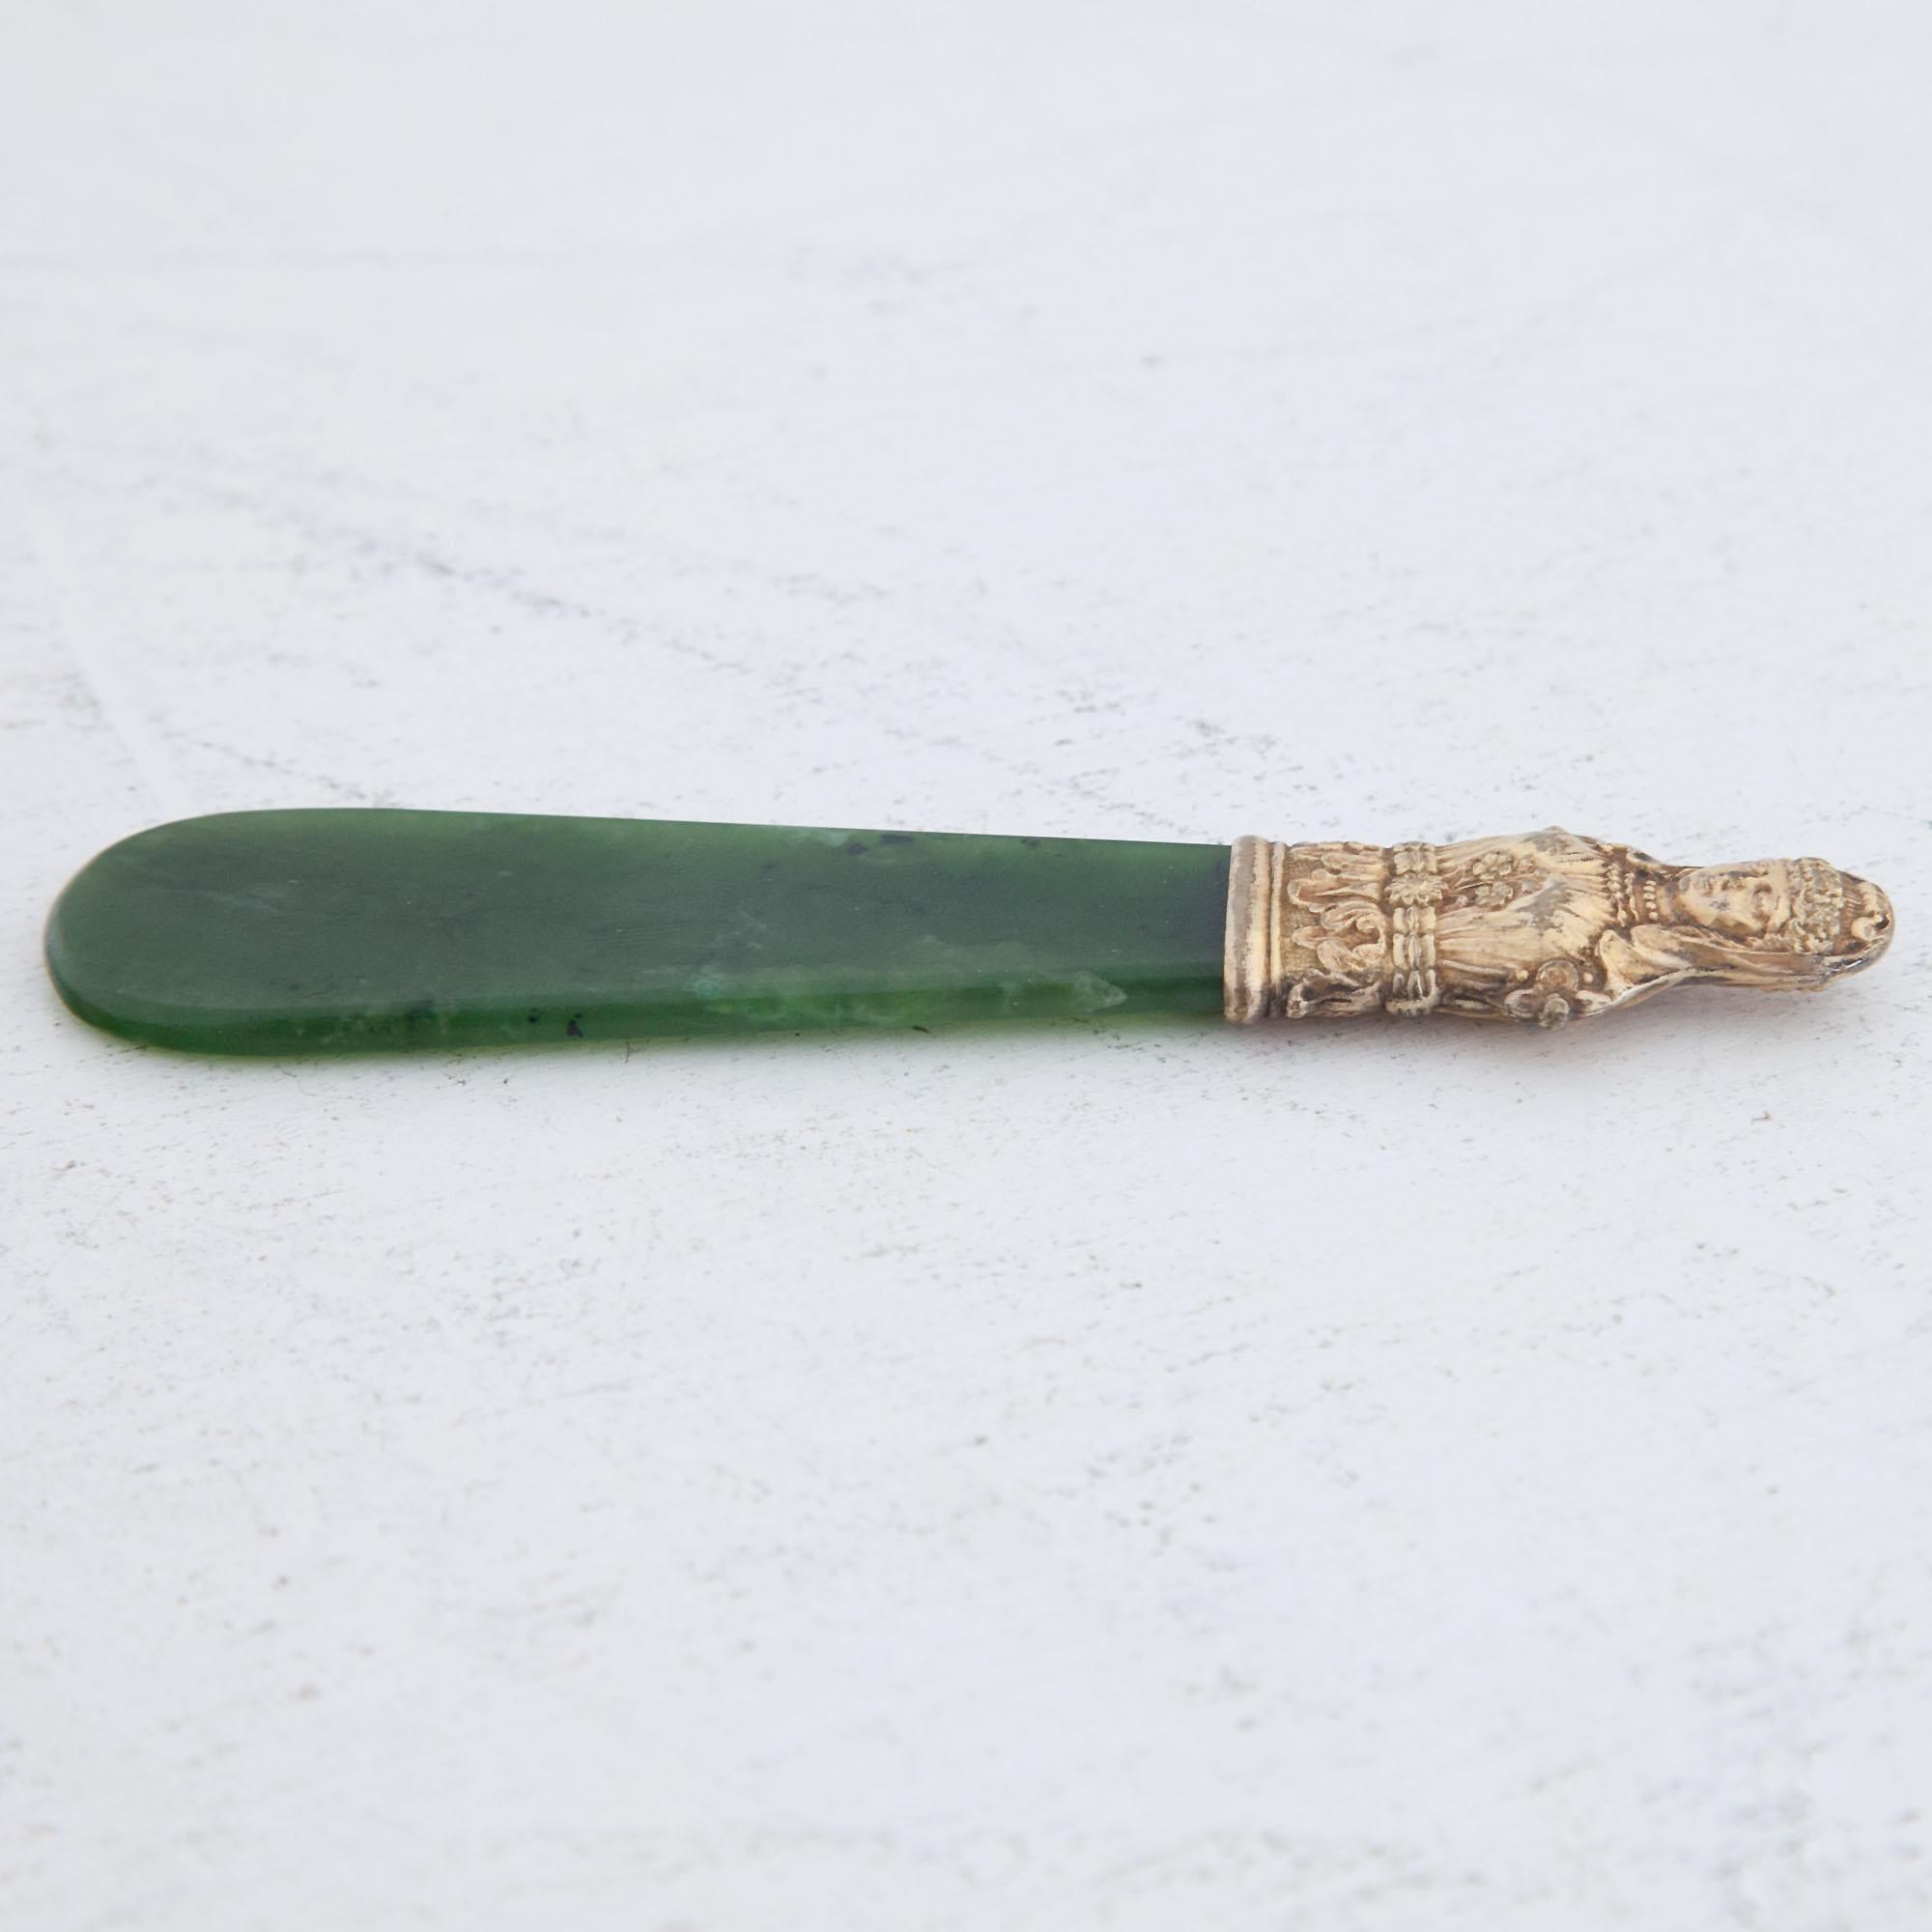 Russian Nephrite Caviar Knife, Probably, Russia, First Half of the 19th Century